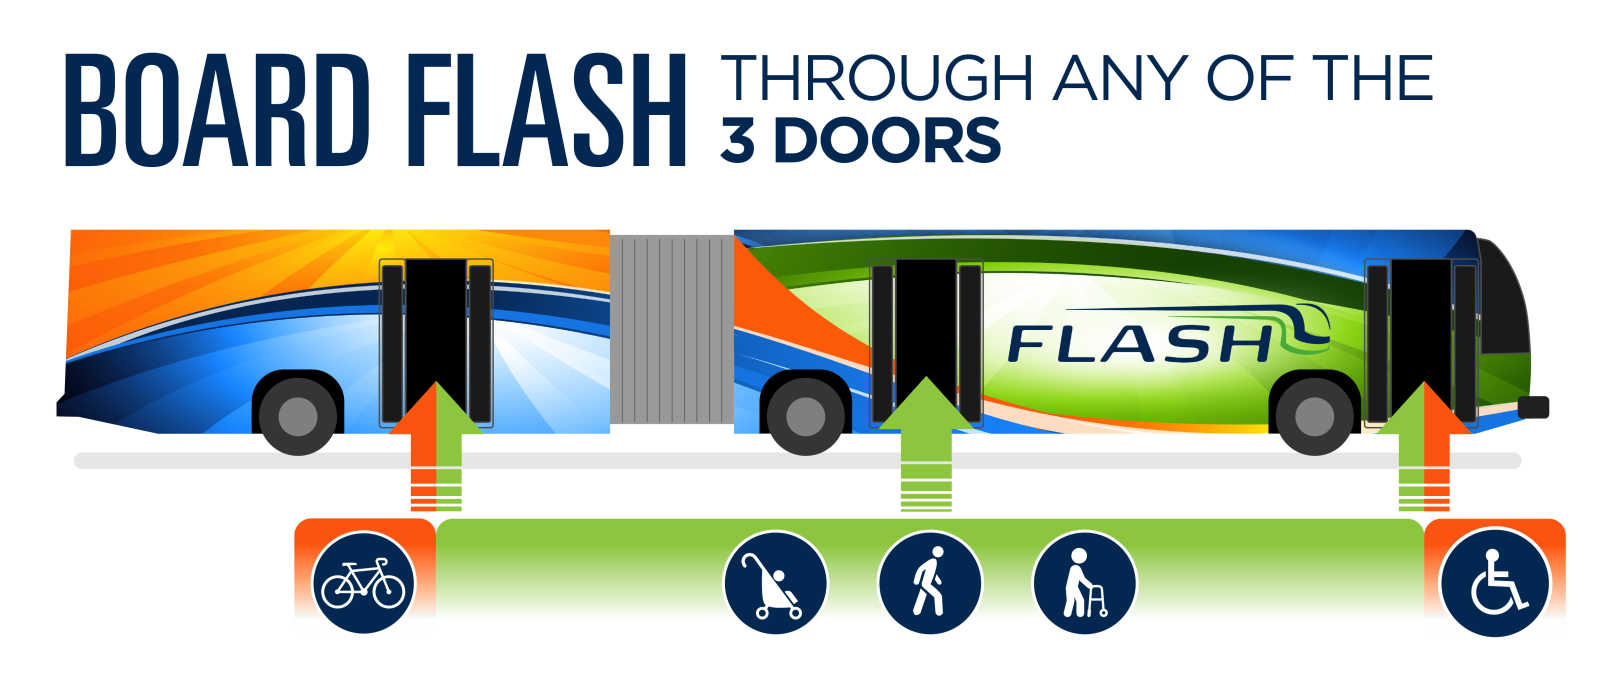 Board FLASH through any of the three doors: front, center, or rear.